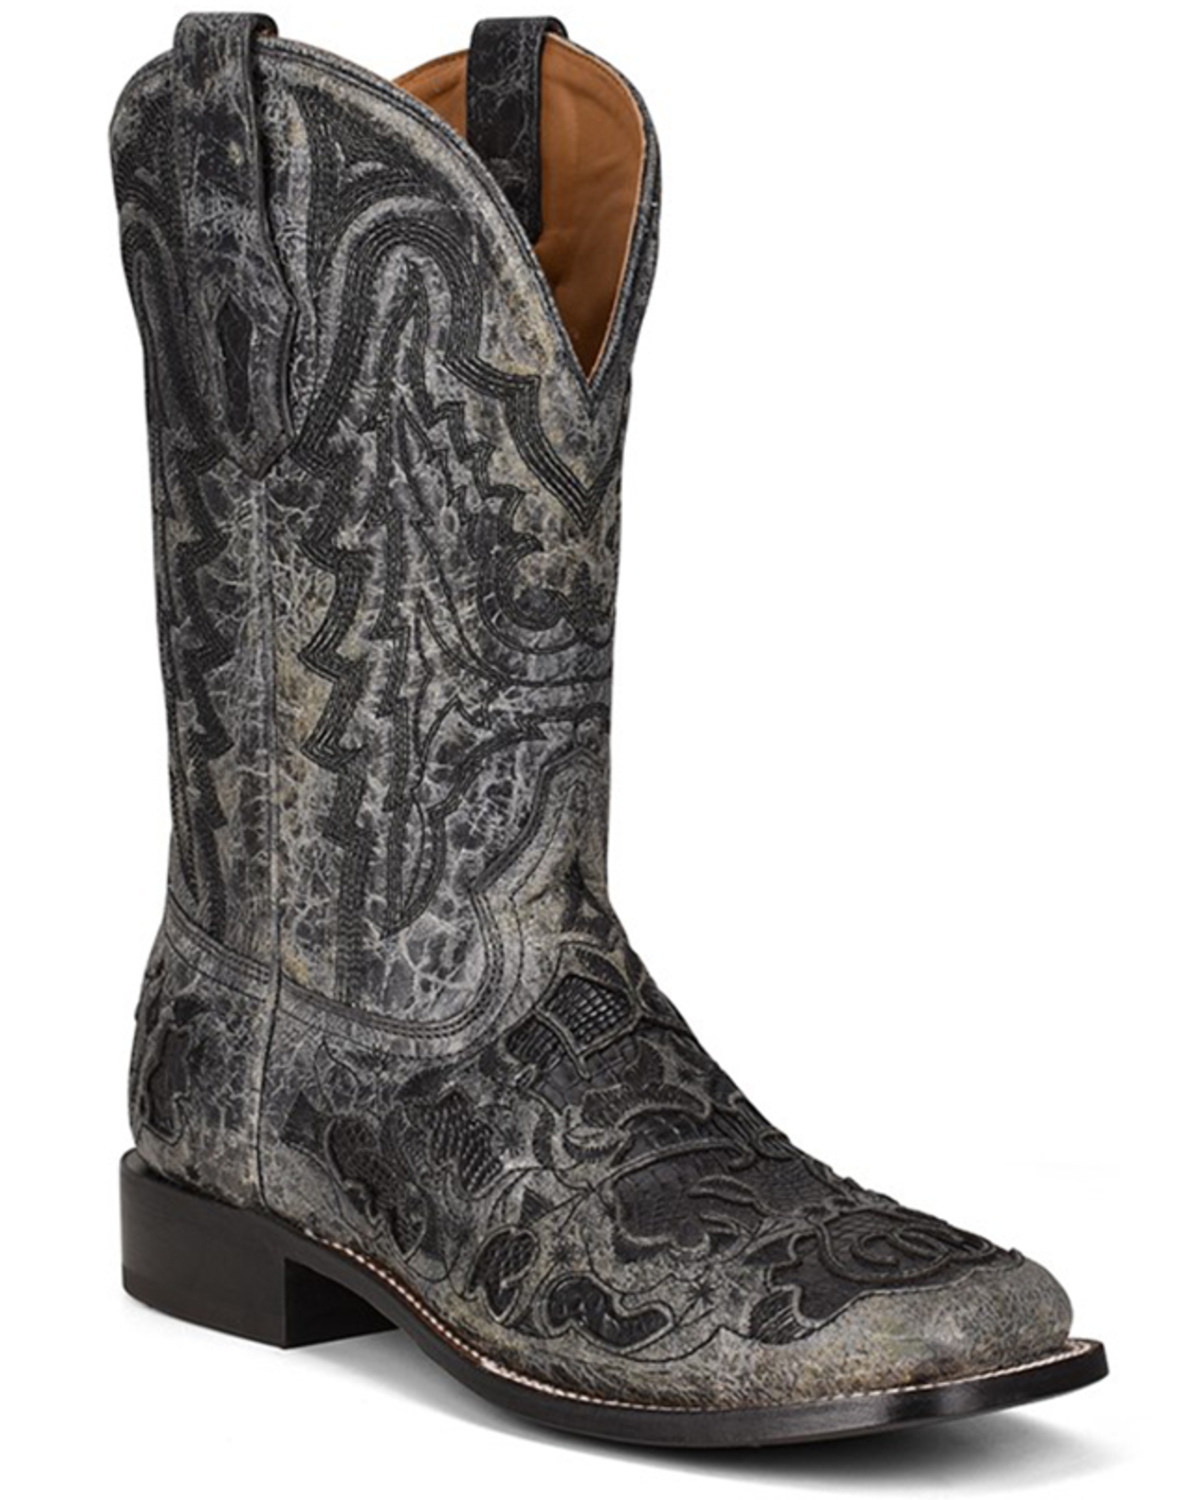 Corral Men's Exotic Alligator Inlay Western Boots - Broad Square Toe